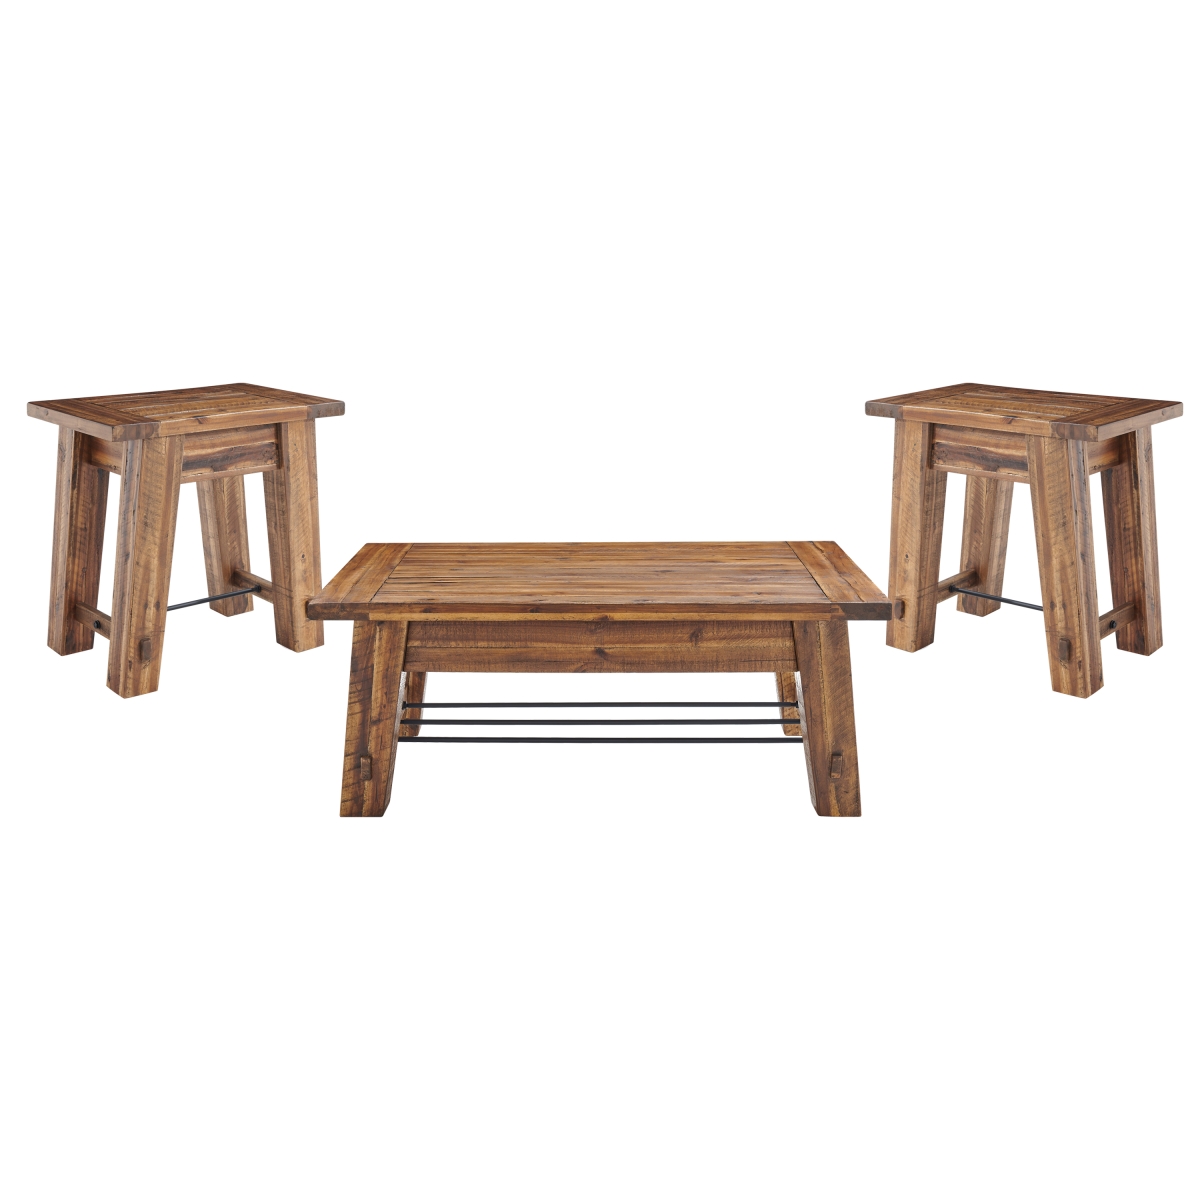 Picture of Alaterre ANDU0111274 48 in. Durango Industrial Wood Coffee & Two End Tables - Set of 3